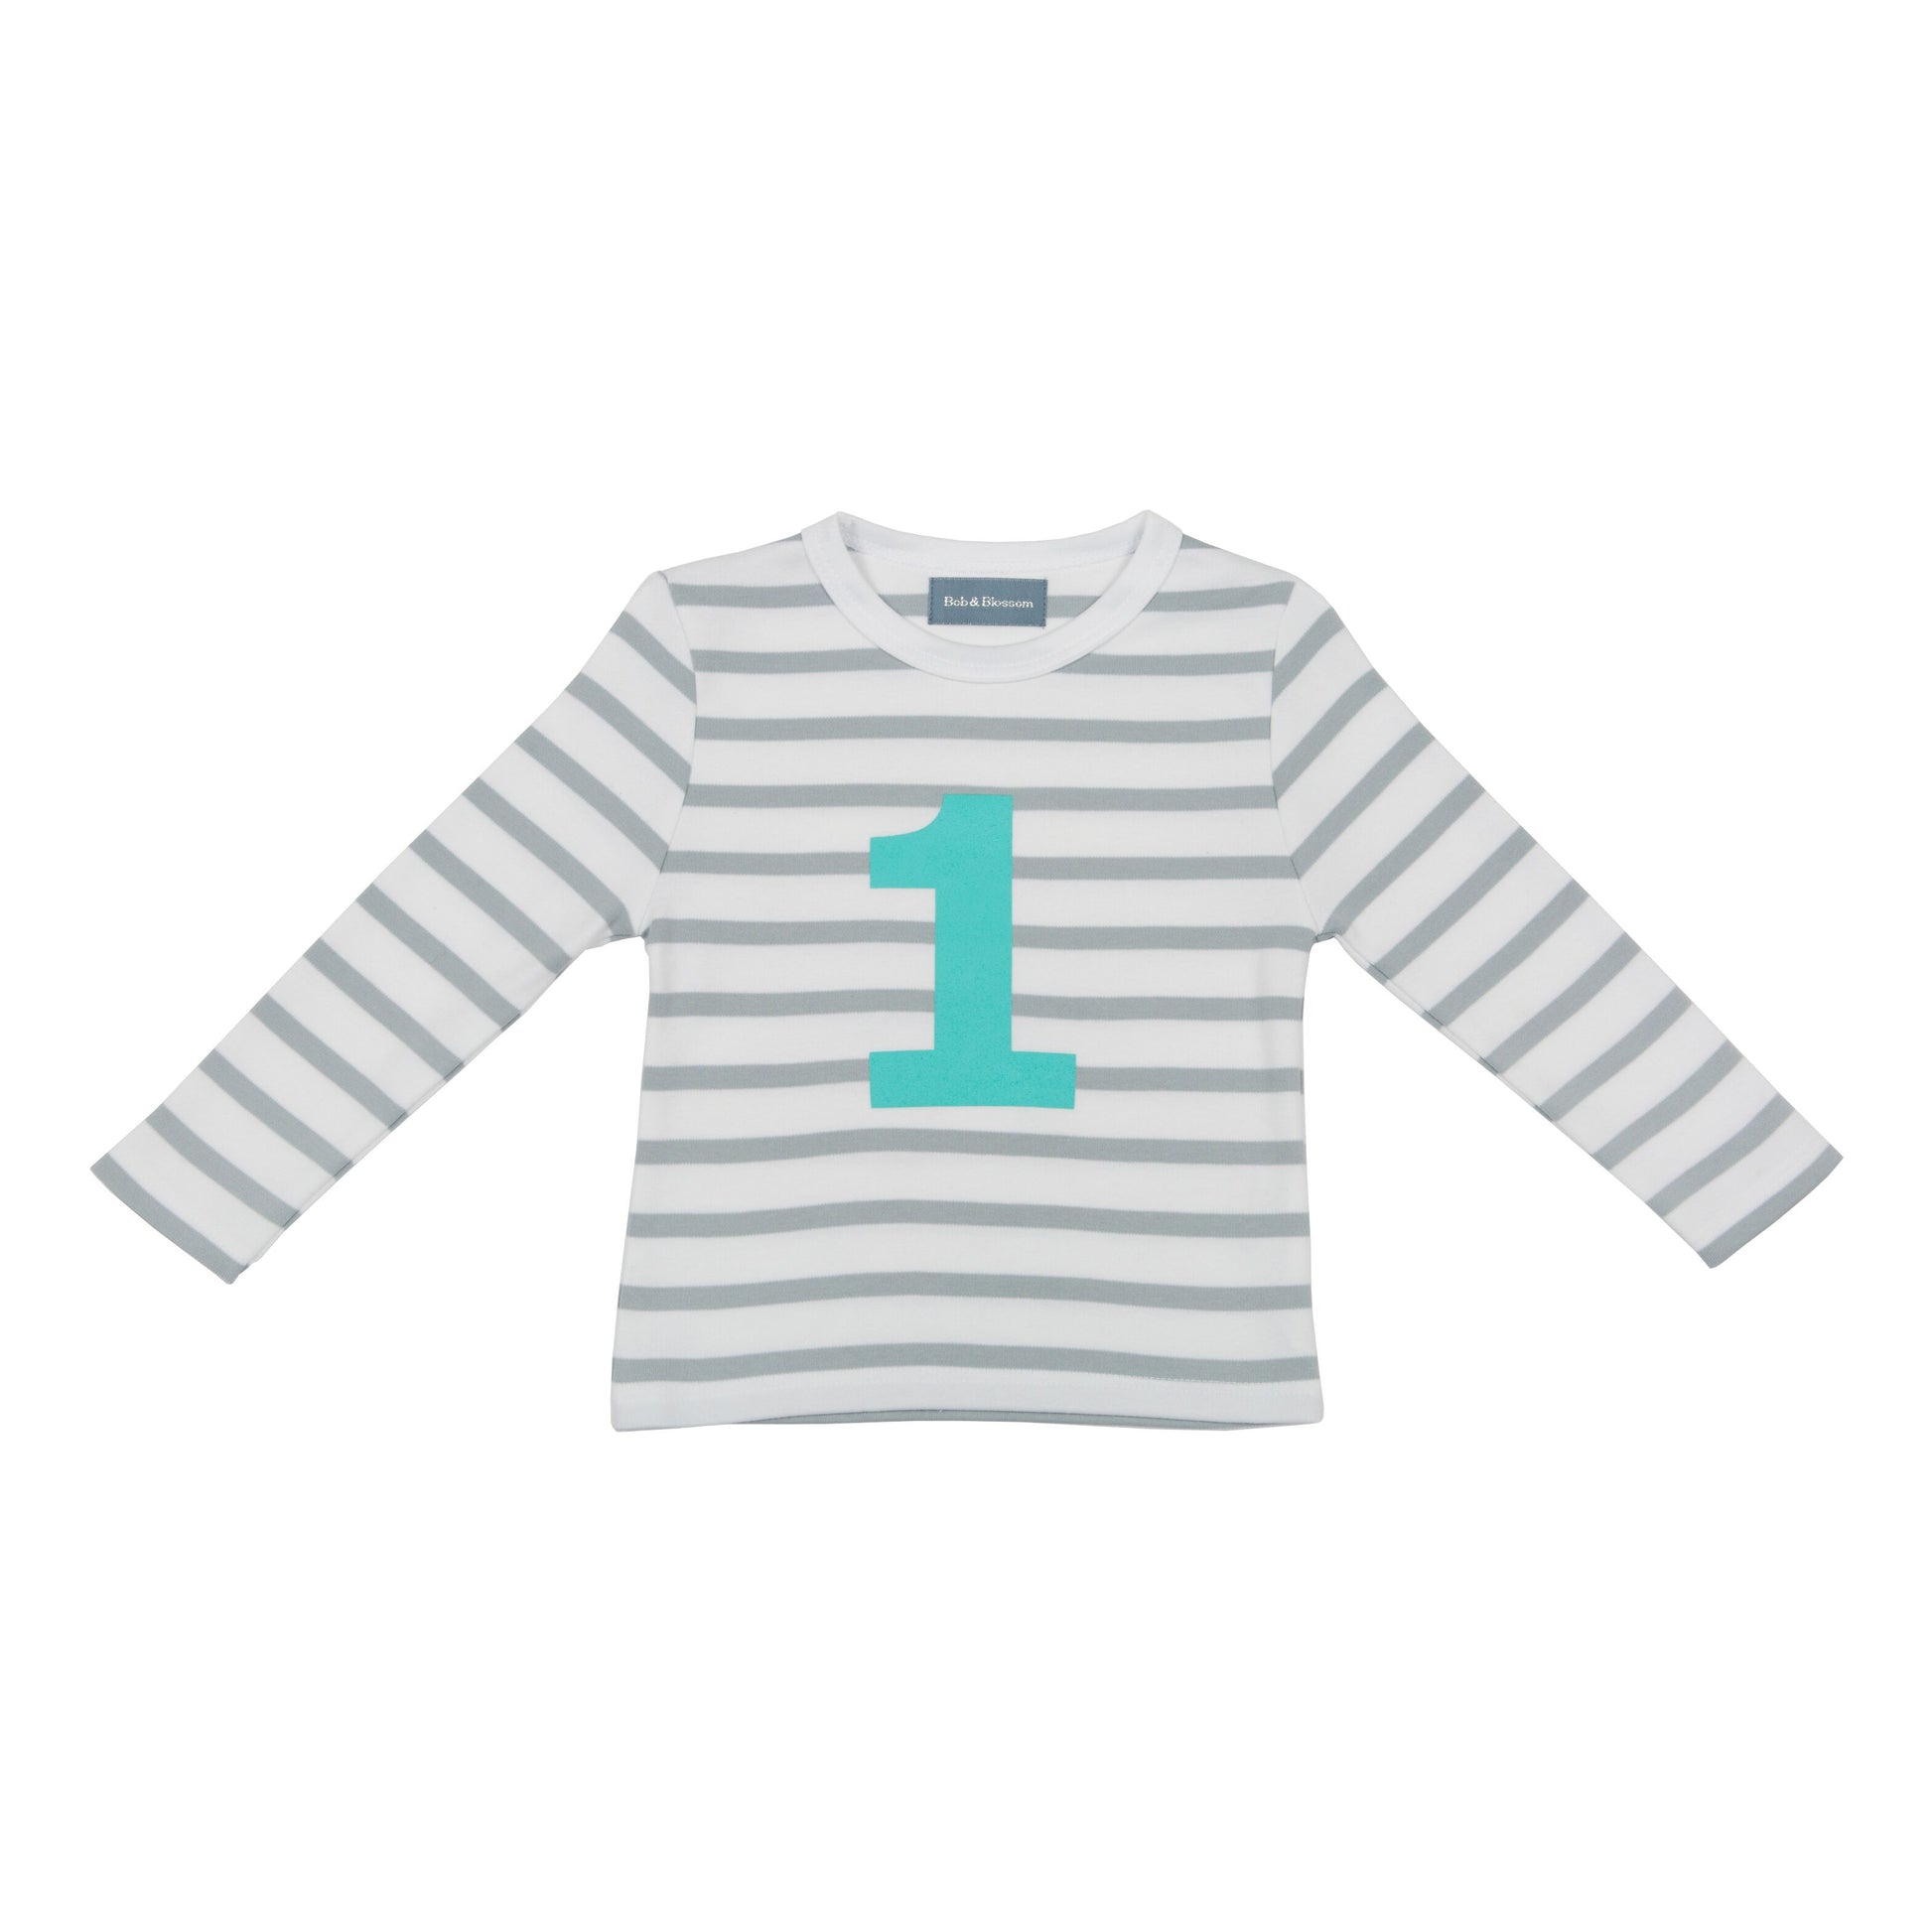 Bob & Blossom grey and white striped long sleeved t shirt with turquoise number 1